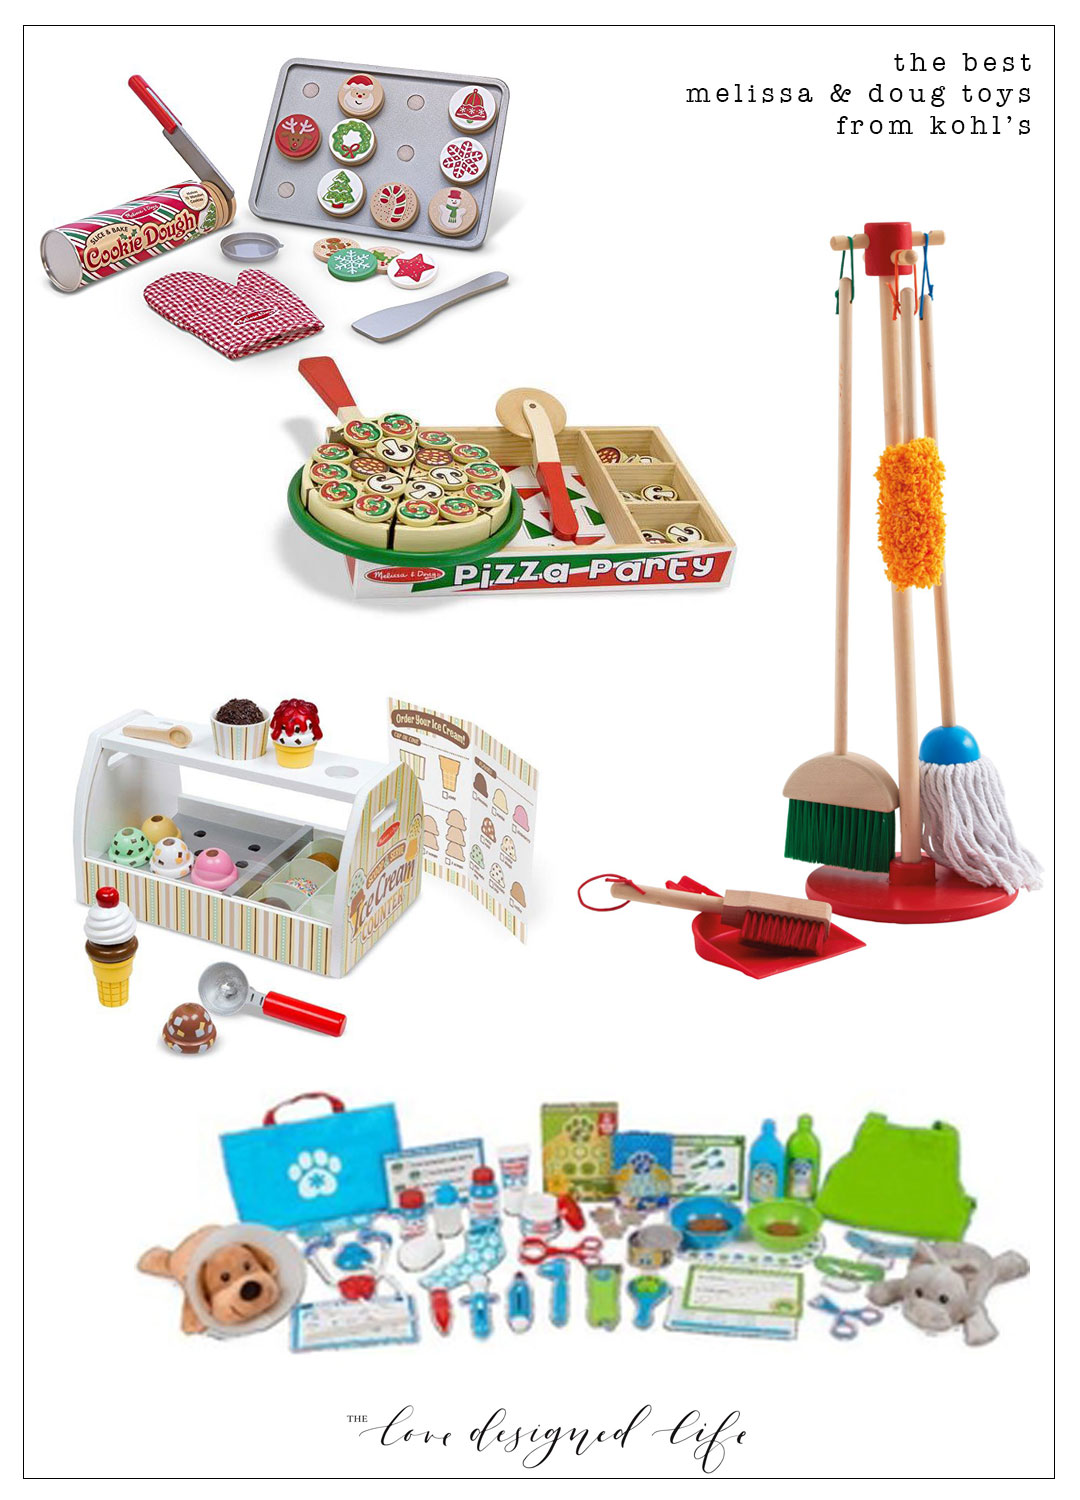 the best melissa & doug toys at kohl's this year for the holidays | thelovedesignedlife.com #christmasgiftideas #toys #holidays